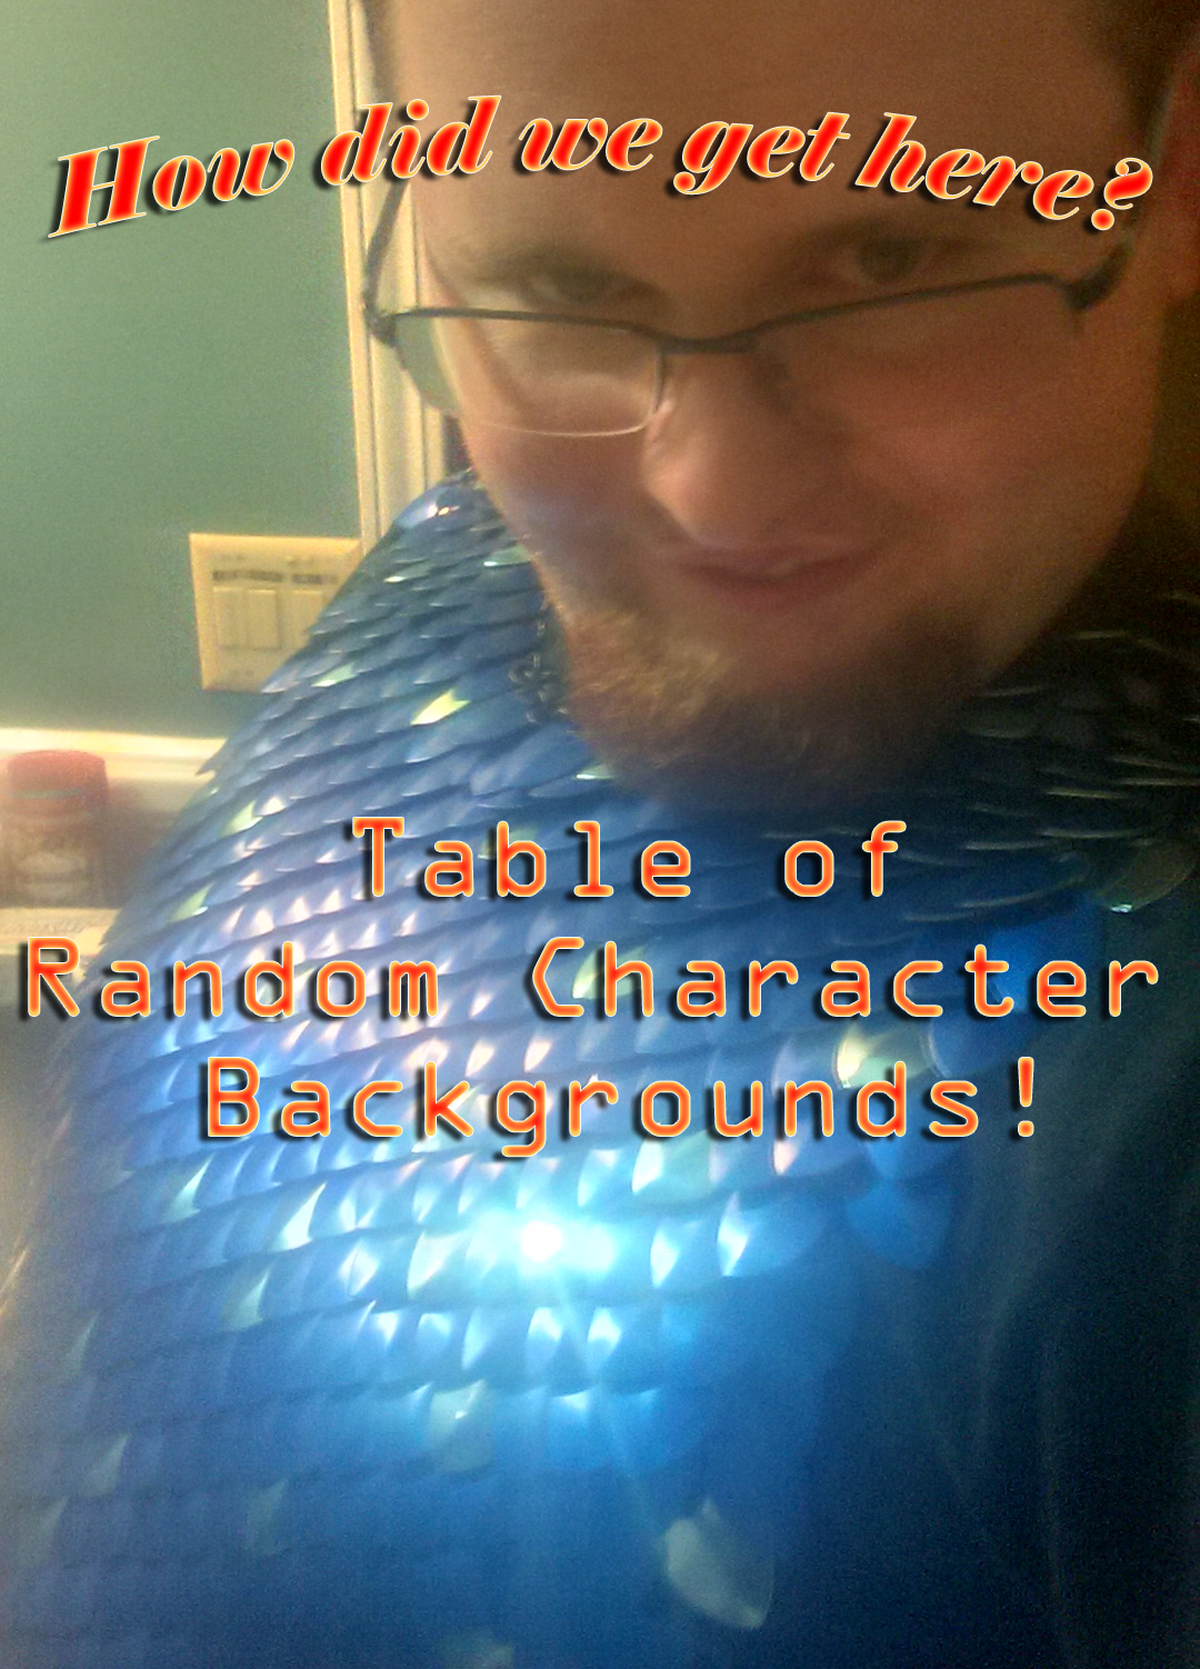 Character Background Table The Spokesman Re